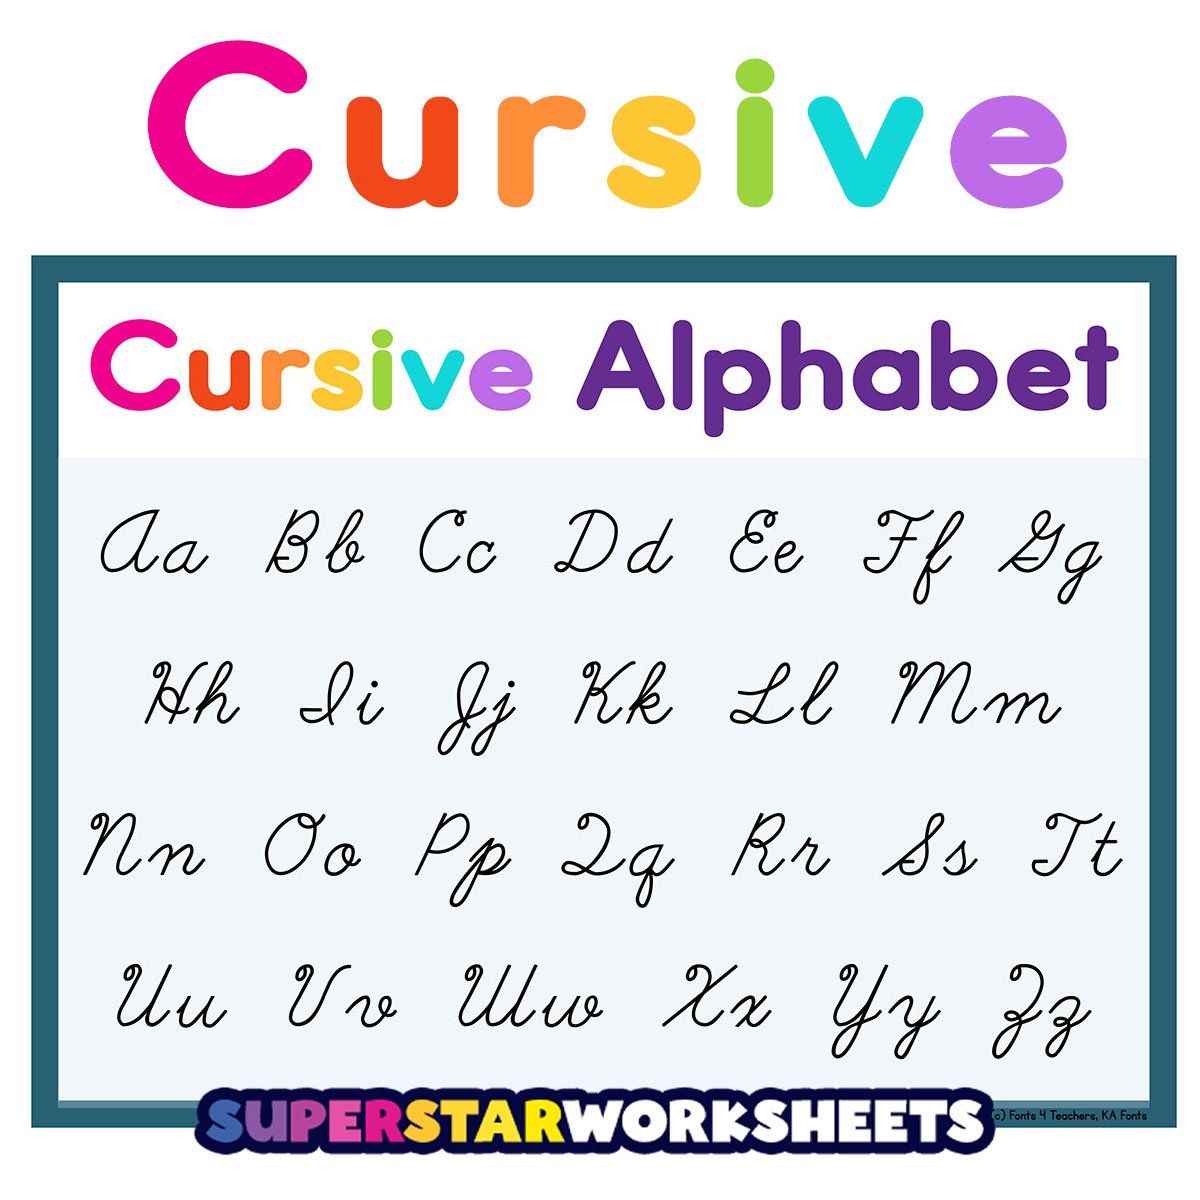 Cursive Letters A-Z uppercase and lowercase for cursive handwriting instruction